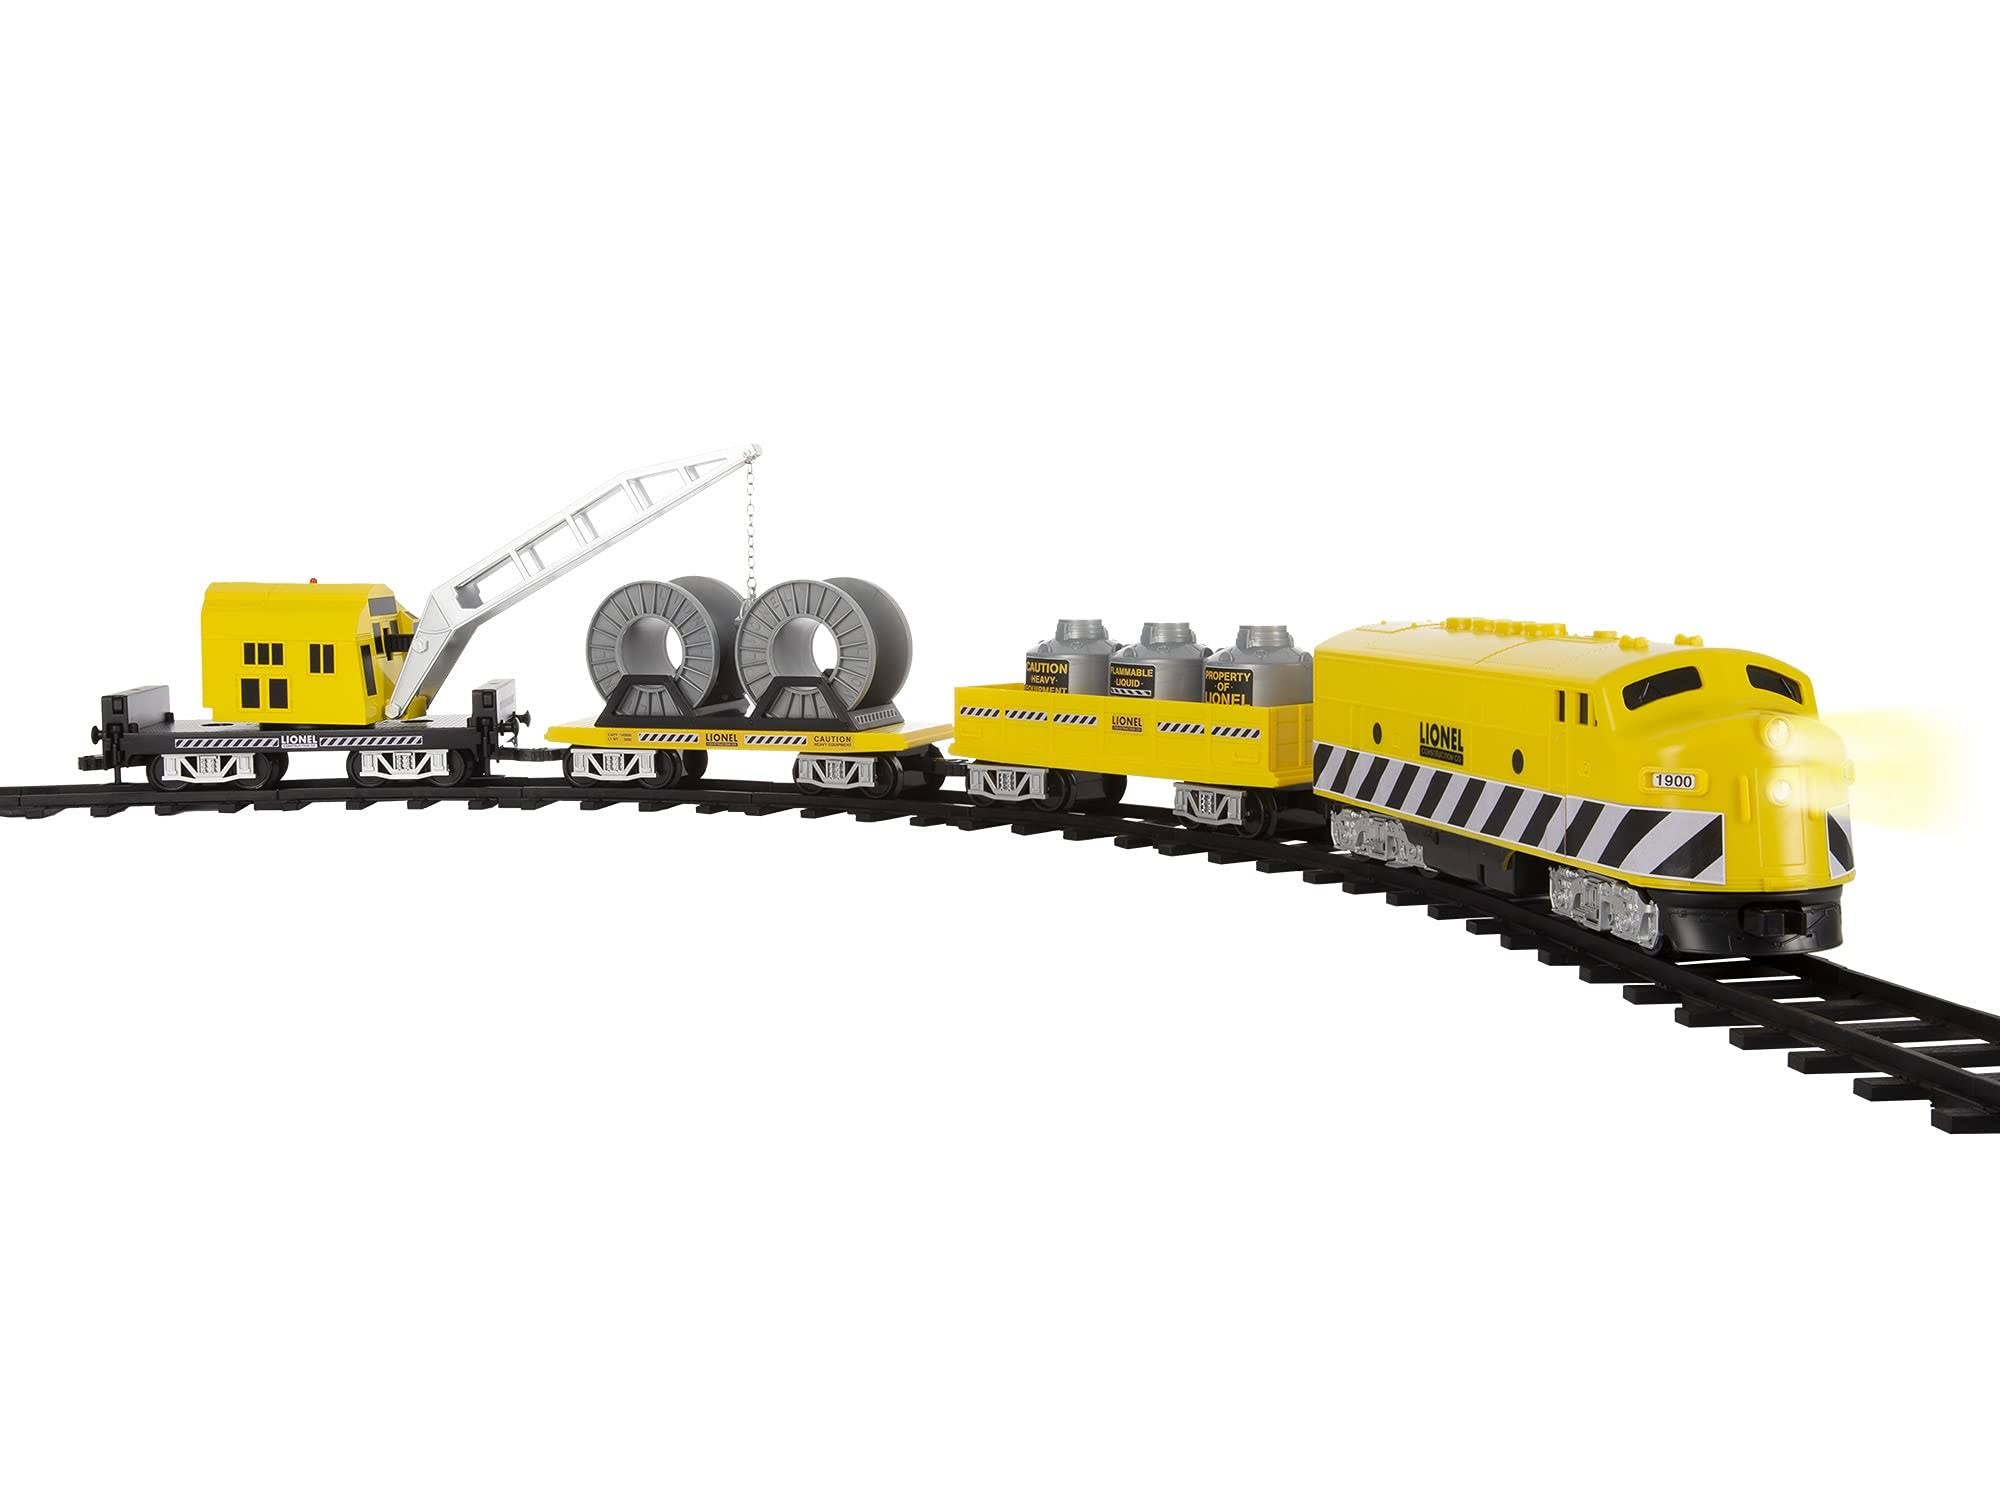 Ready to Play Lionel Construction Train Set | Kids | Unisex | Black/Gray/Yellow | One-Size | Lionel